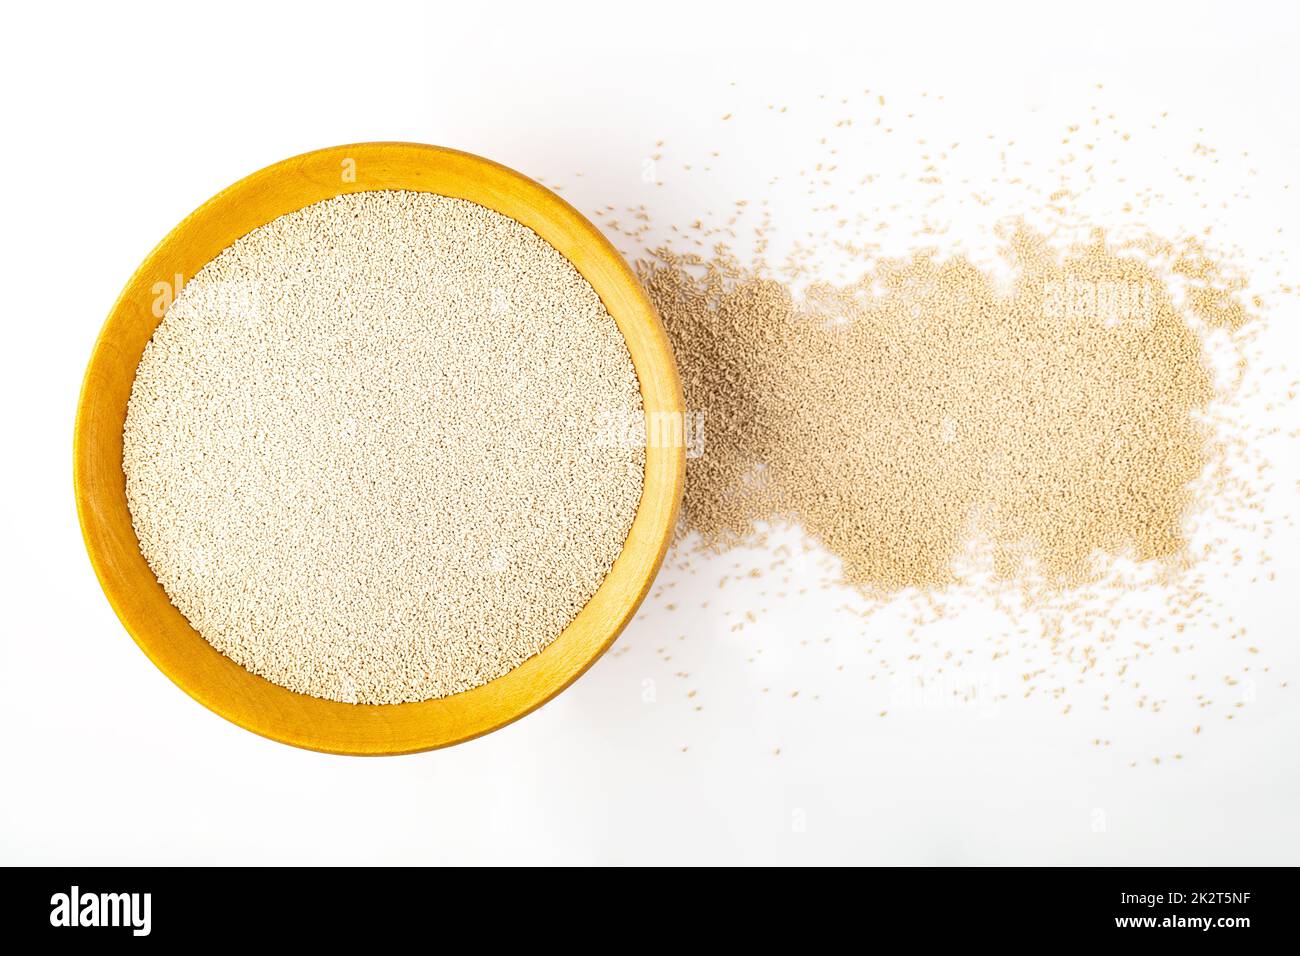 Dry Yeast in a bowl over bright background Stock Photo